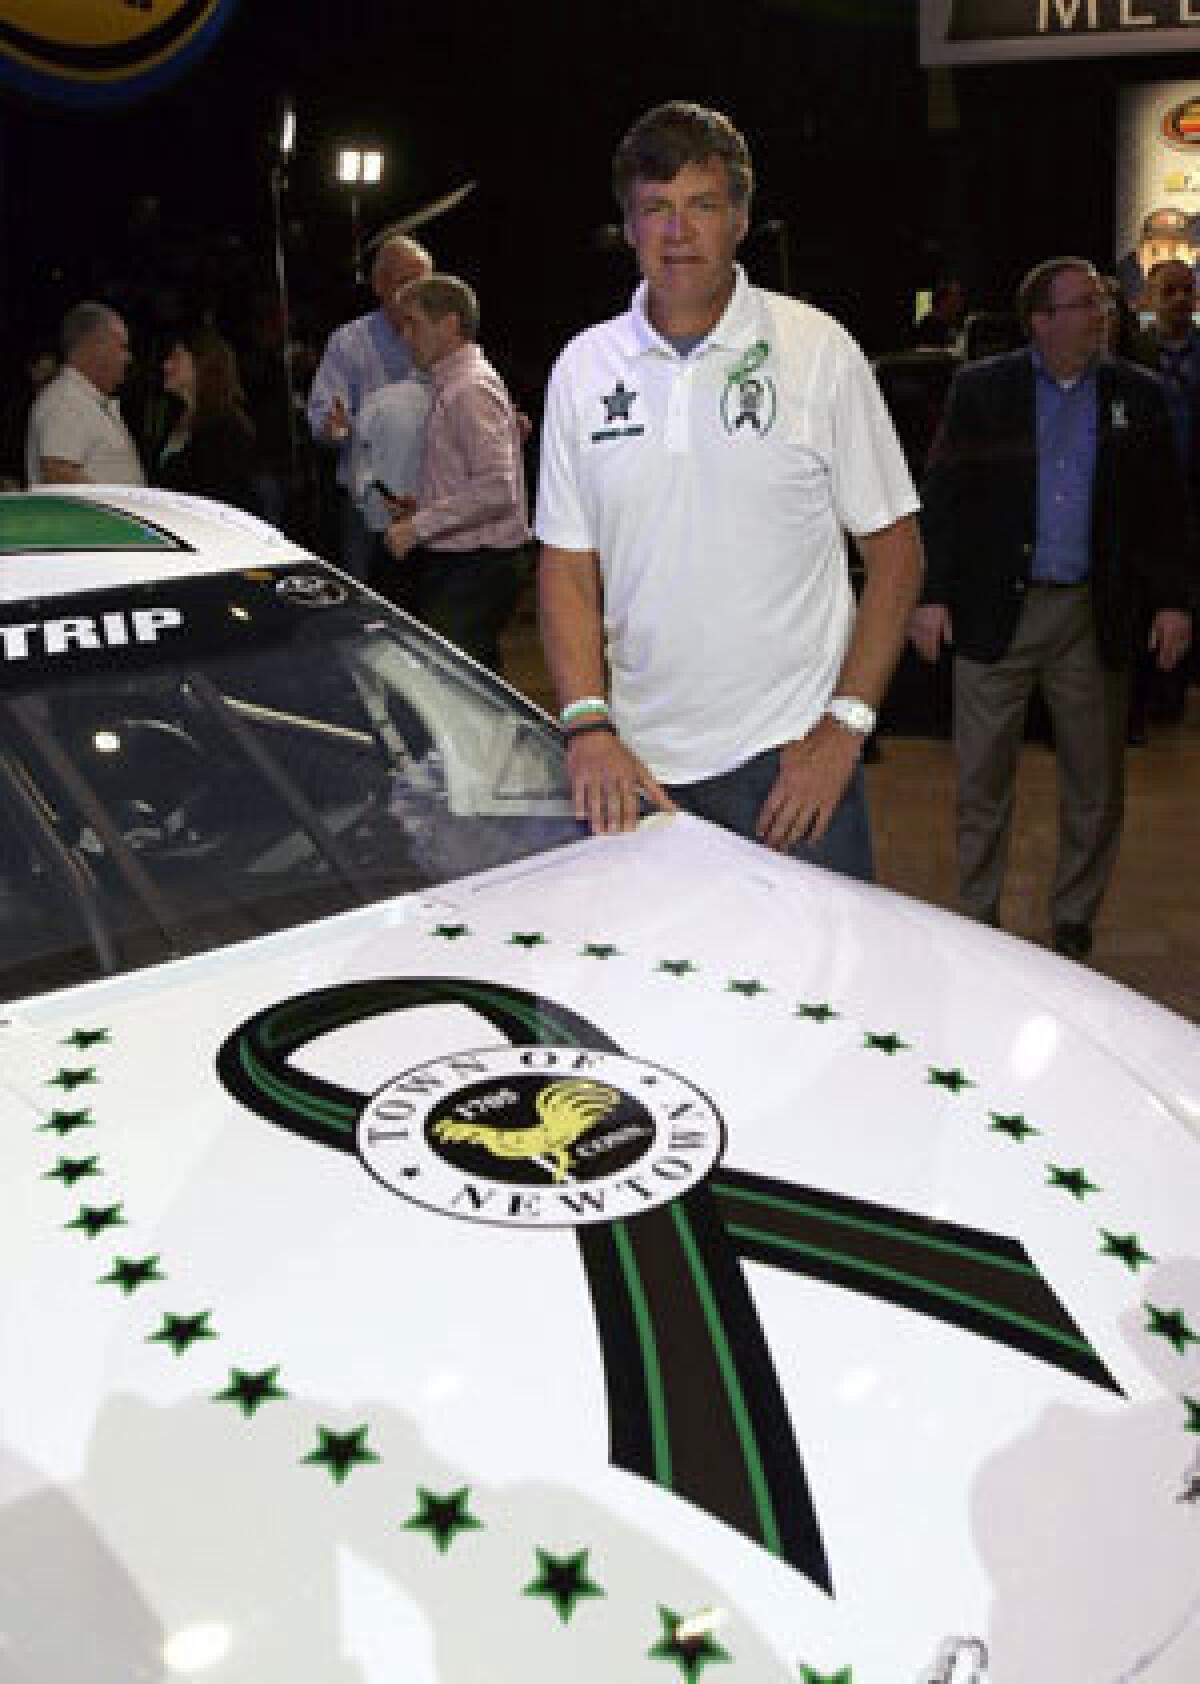 Michael Waltrip poses with the car he will drive in this year's Daytona 500.